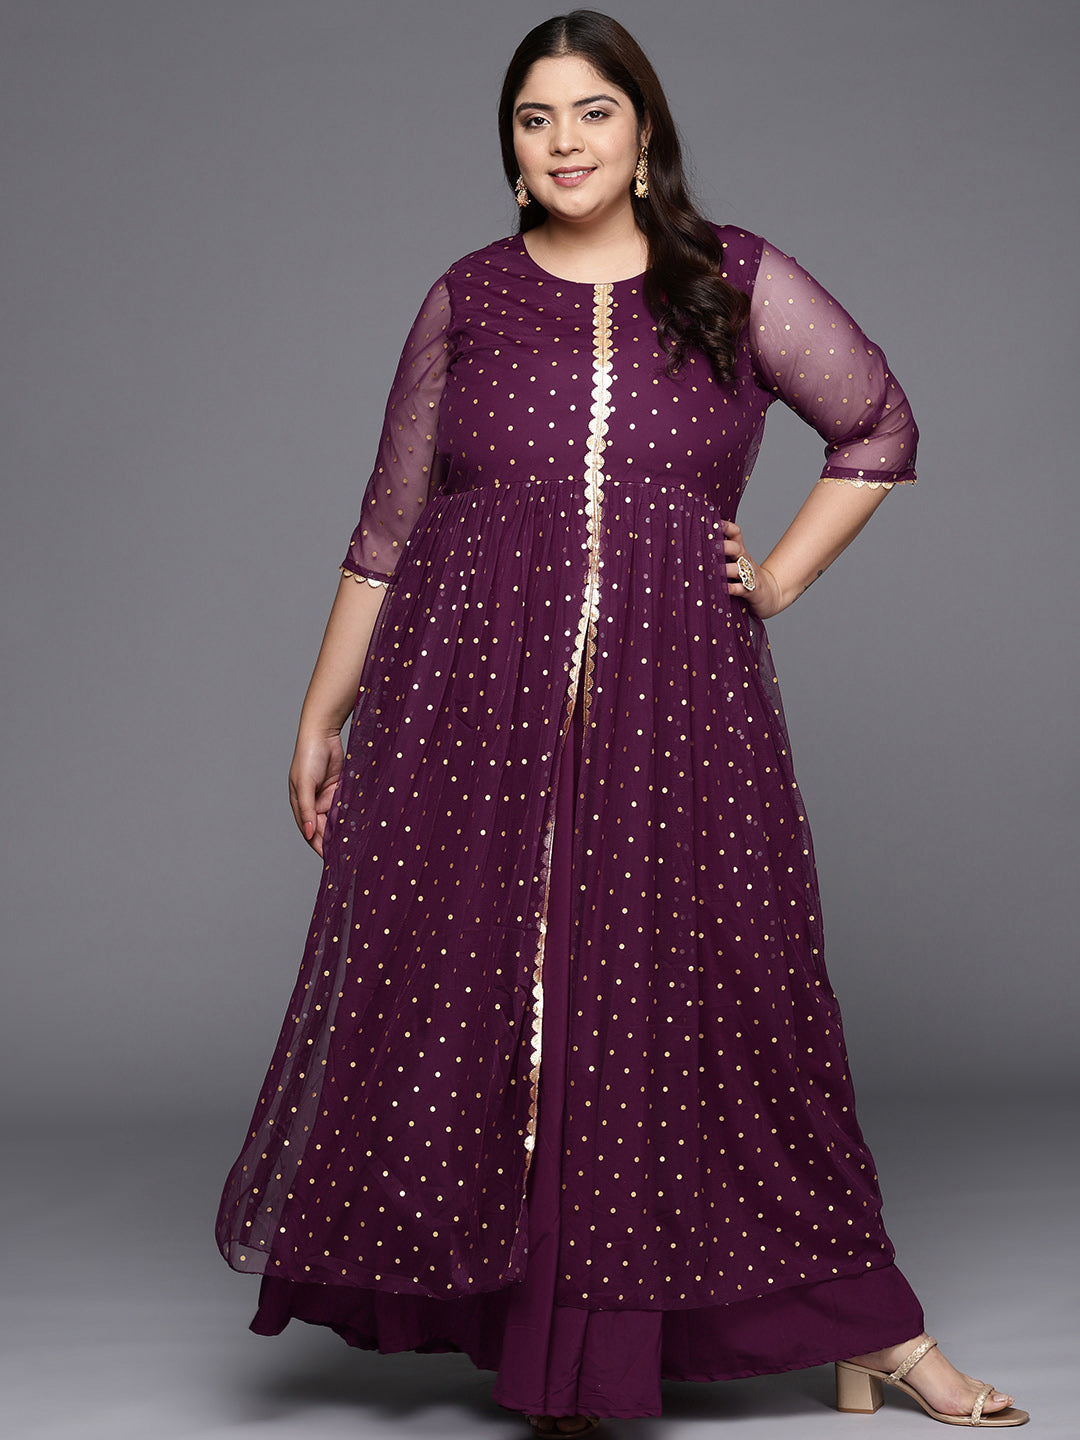 Shop Plus Size Clothing From Meera The Plus Size Store